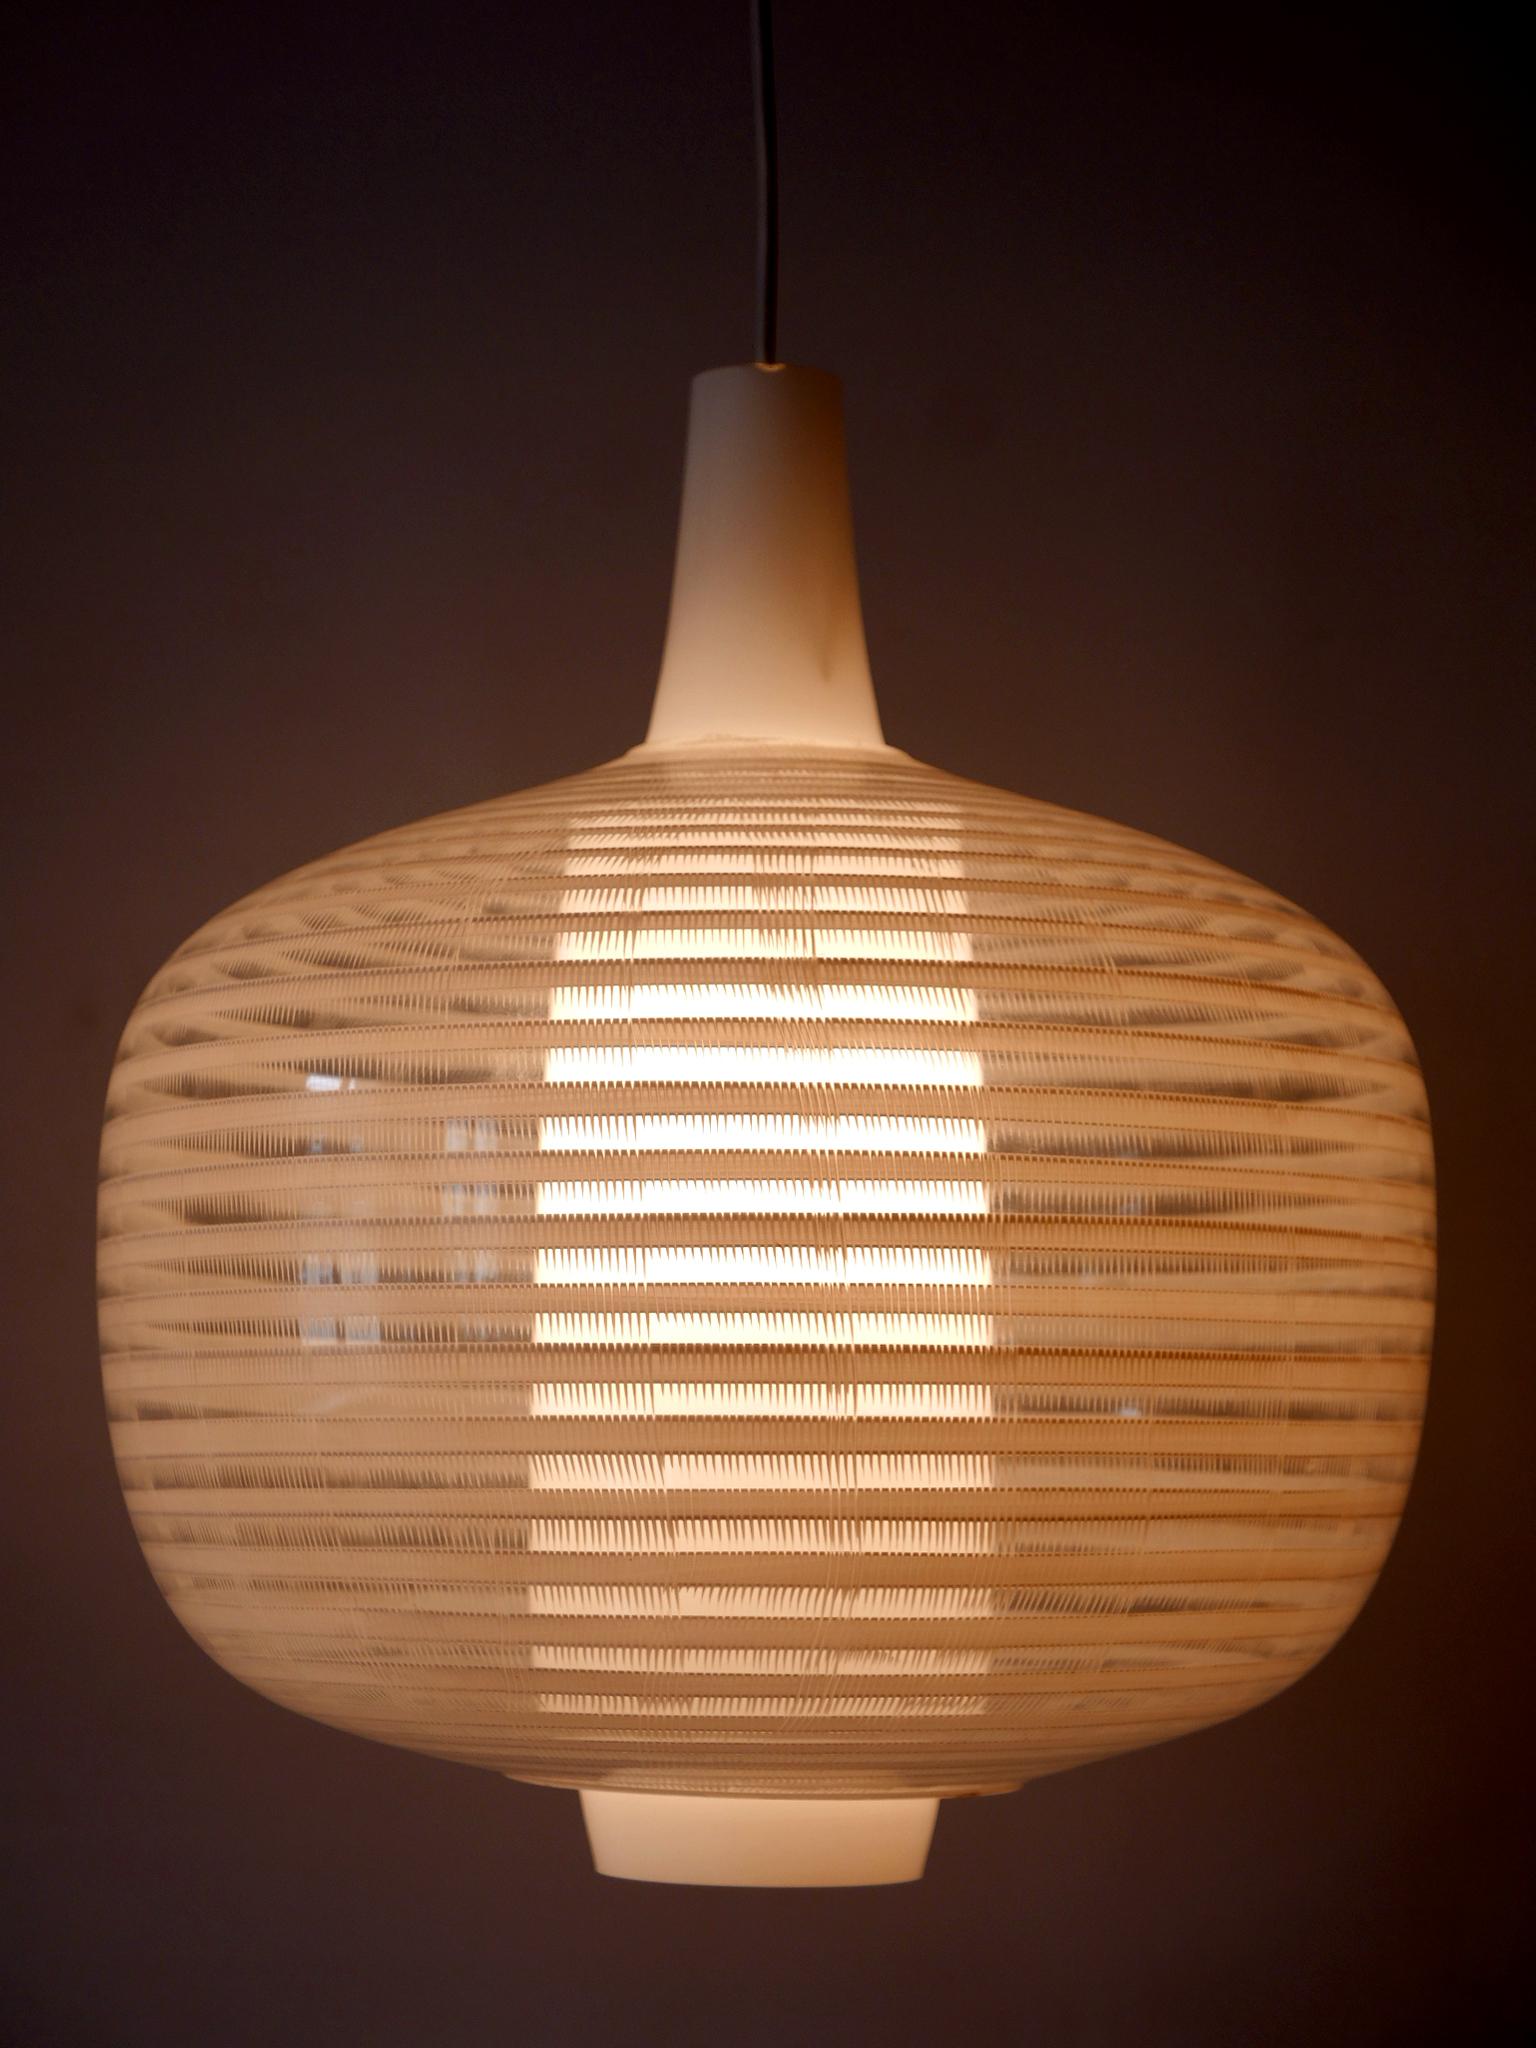 Etched Rare & Large Mid-Century Modern Pendant Lamp Napoli by Aloys F. Gangkofner 1957 For Sale